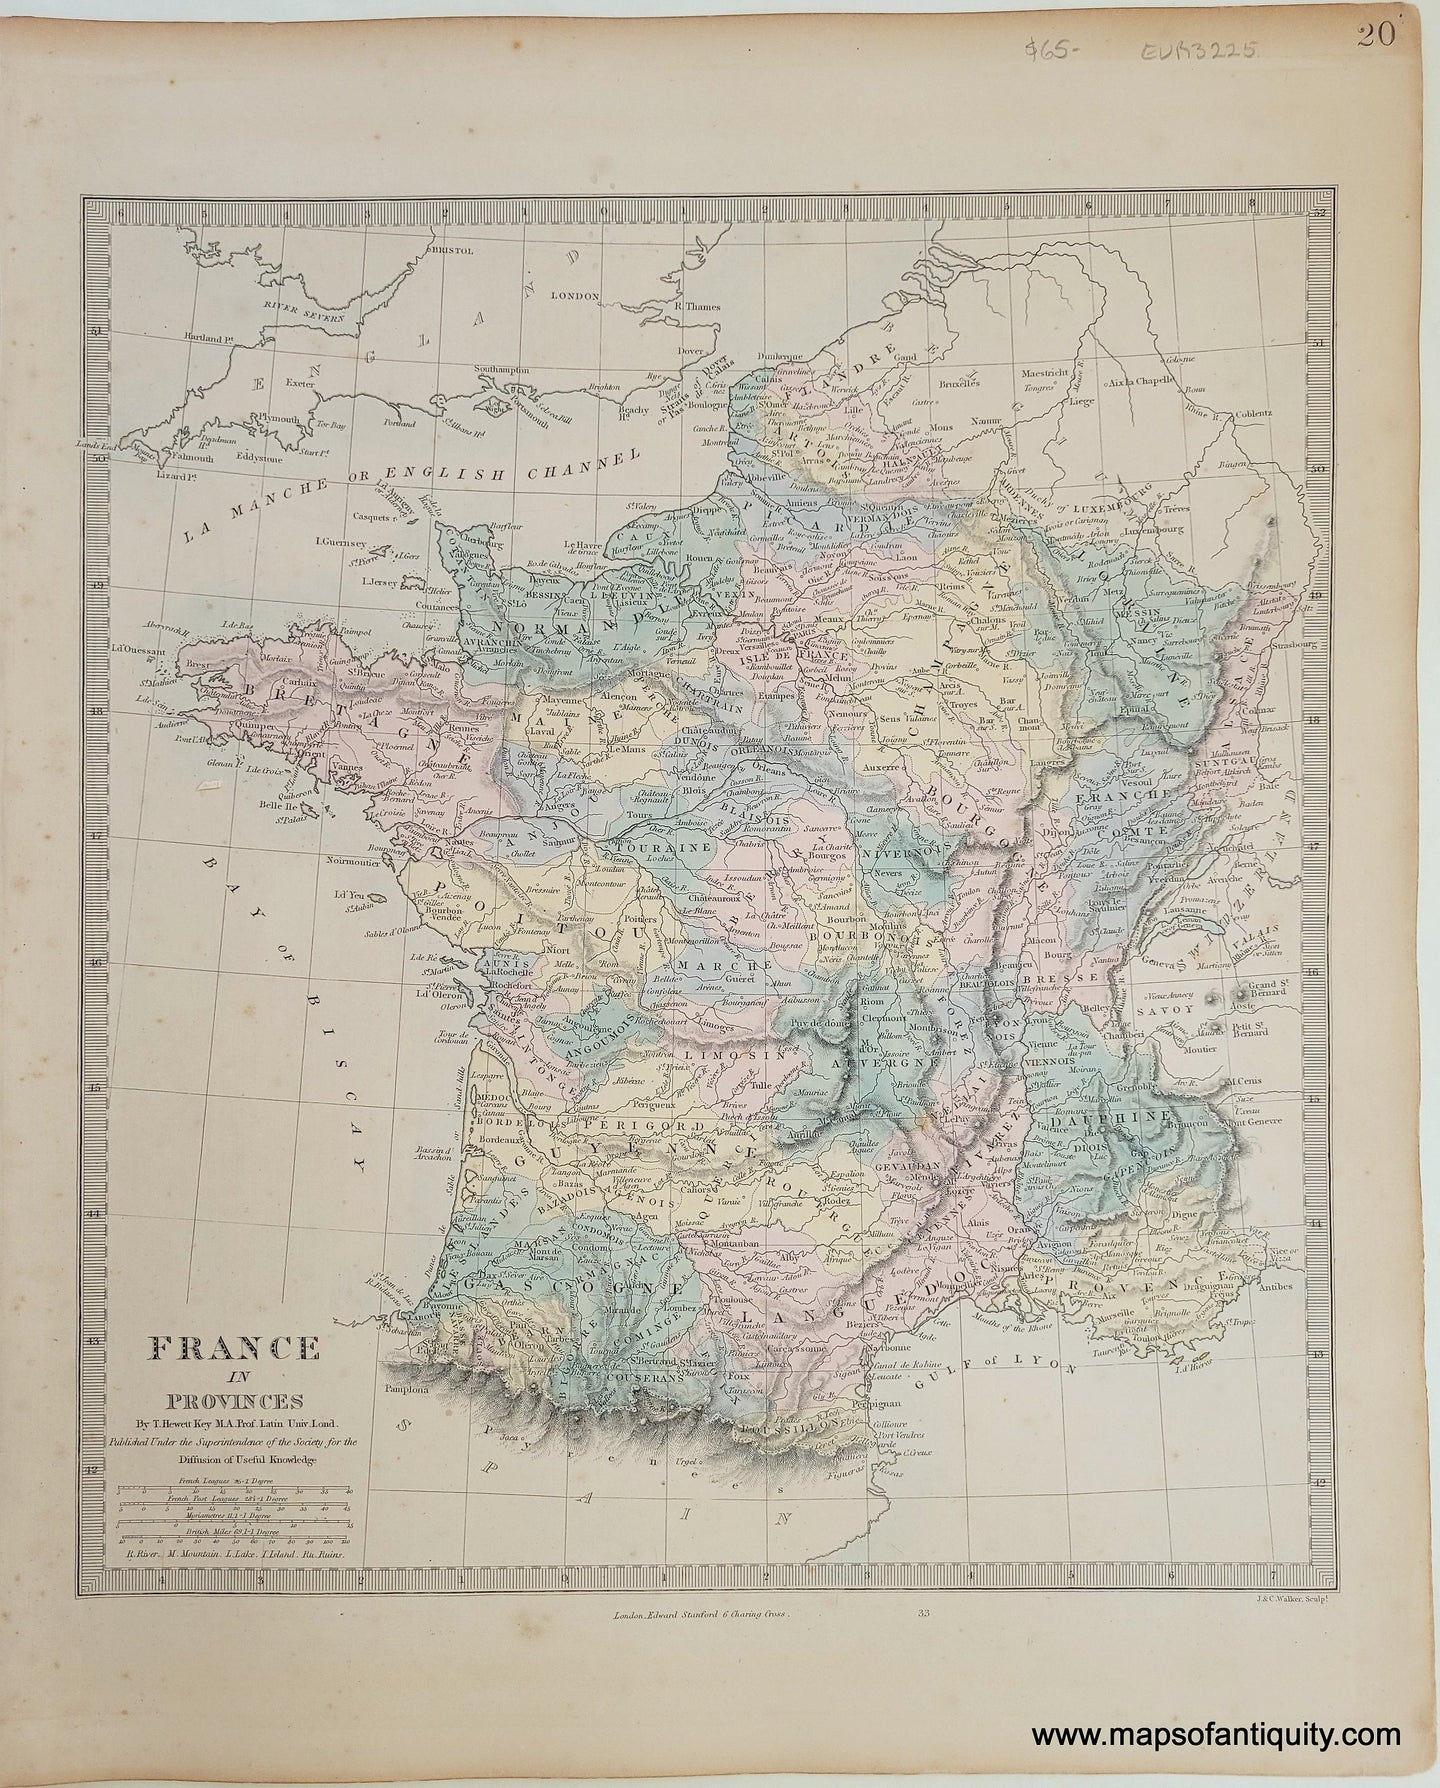 Genuine-Antique-Map-France-in-Provinces-France--1860-SDUK-Society-for-the-Diffusion-of-Useful-Knowledge-Maps-Of-Antiquity-1800s-19th-century